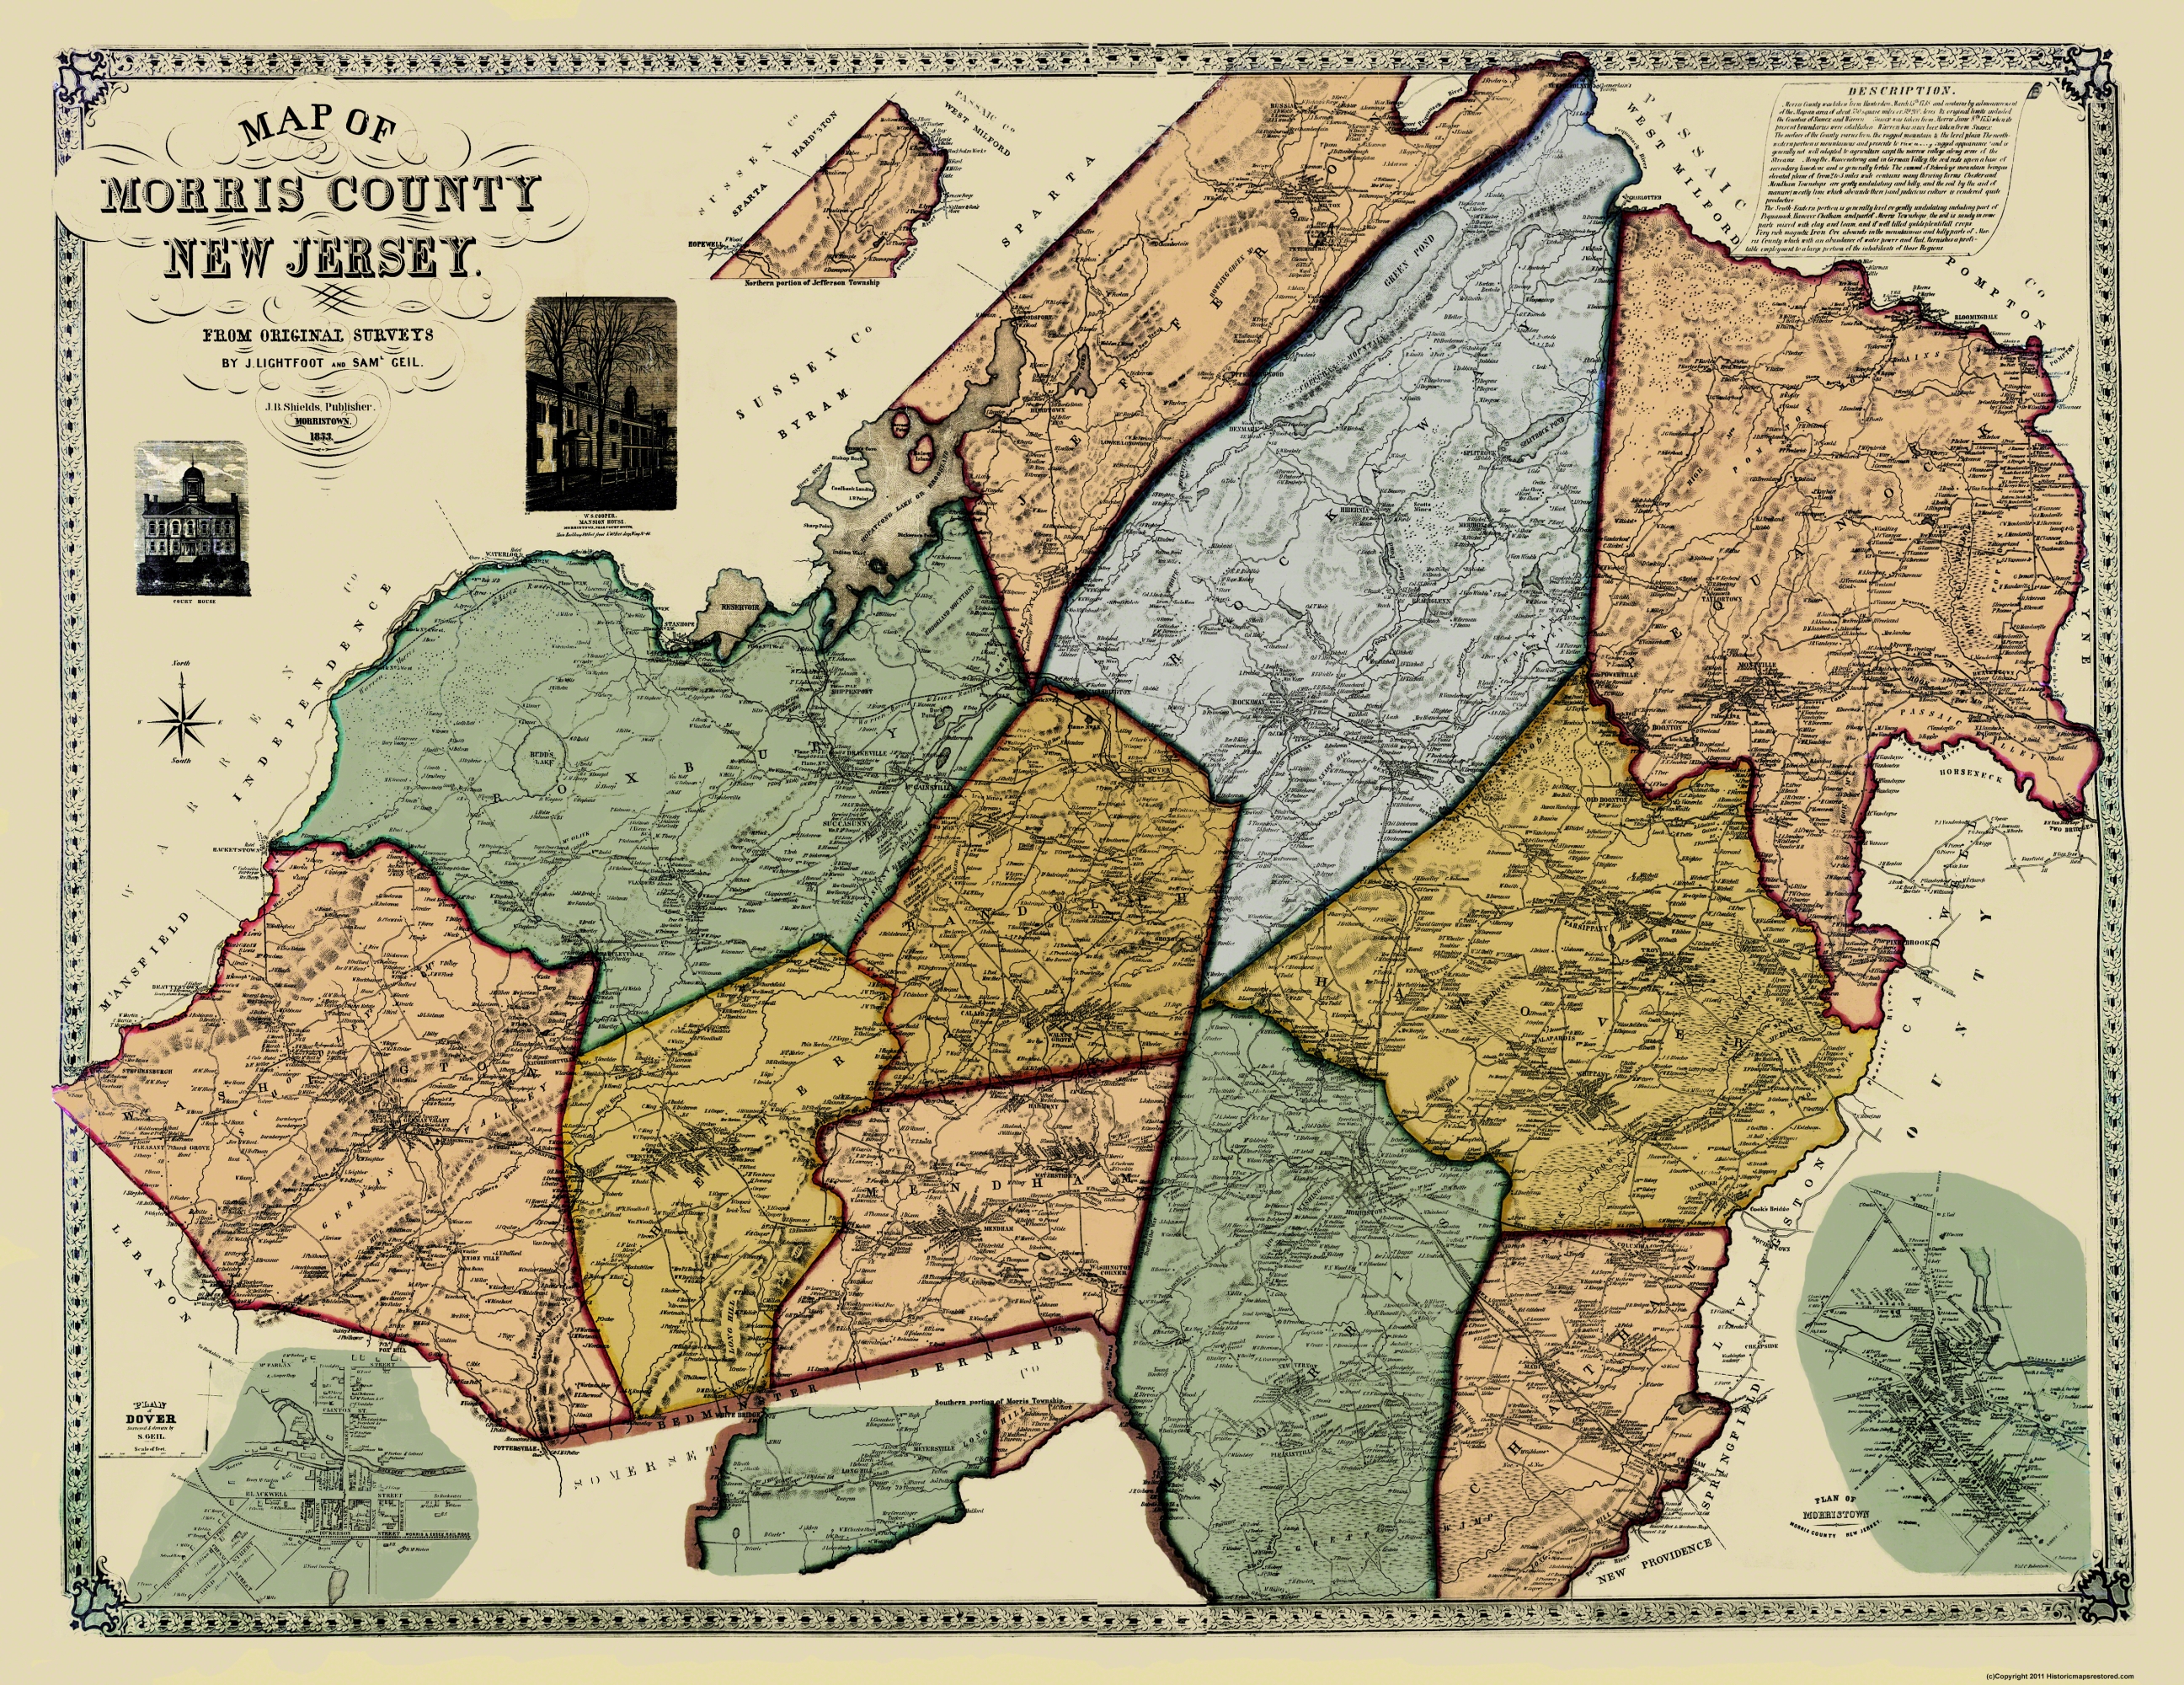 Morris County New Jersey Street Map by Franklin Maps